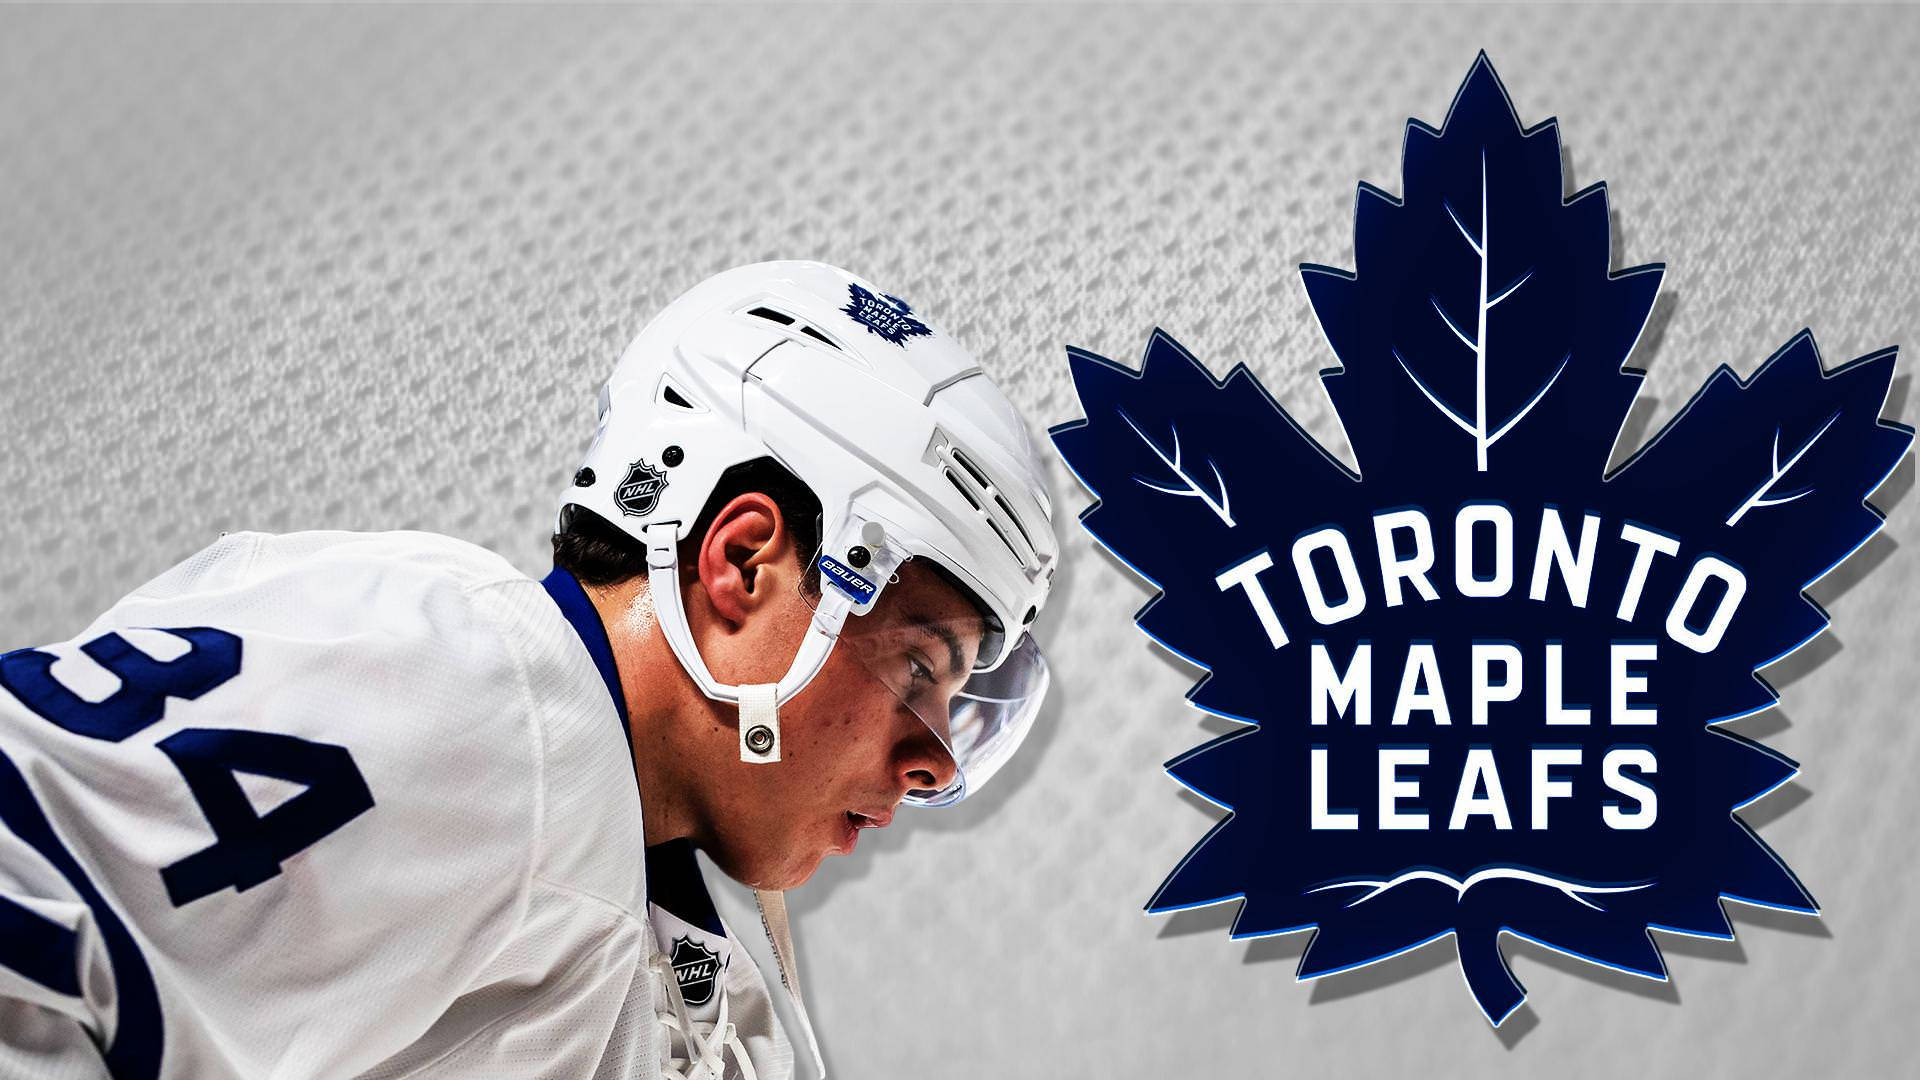 Toronto Maple Leafs Player And Logo Wallpaper